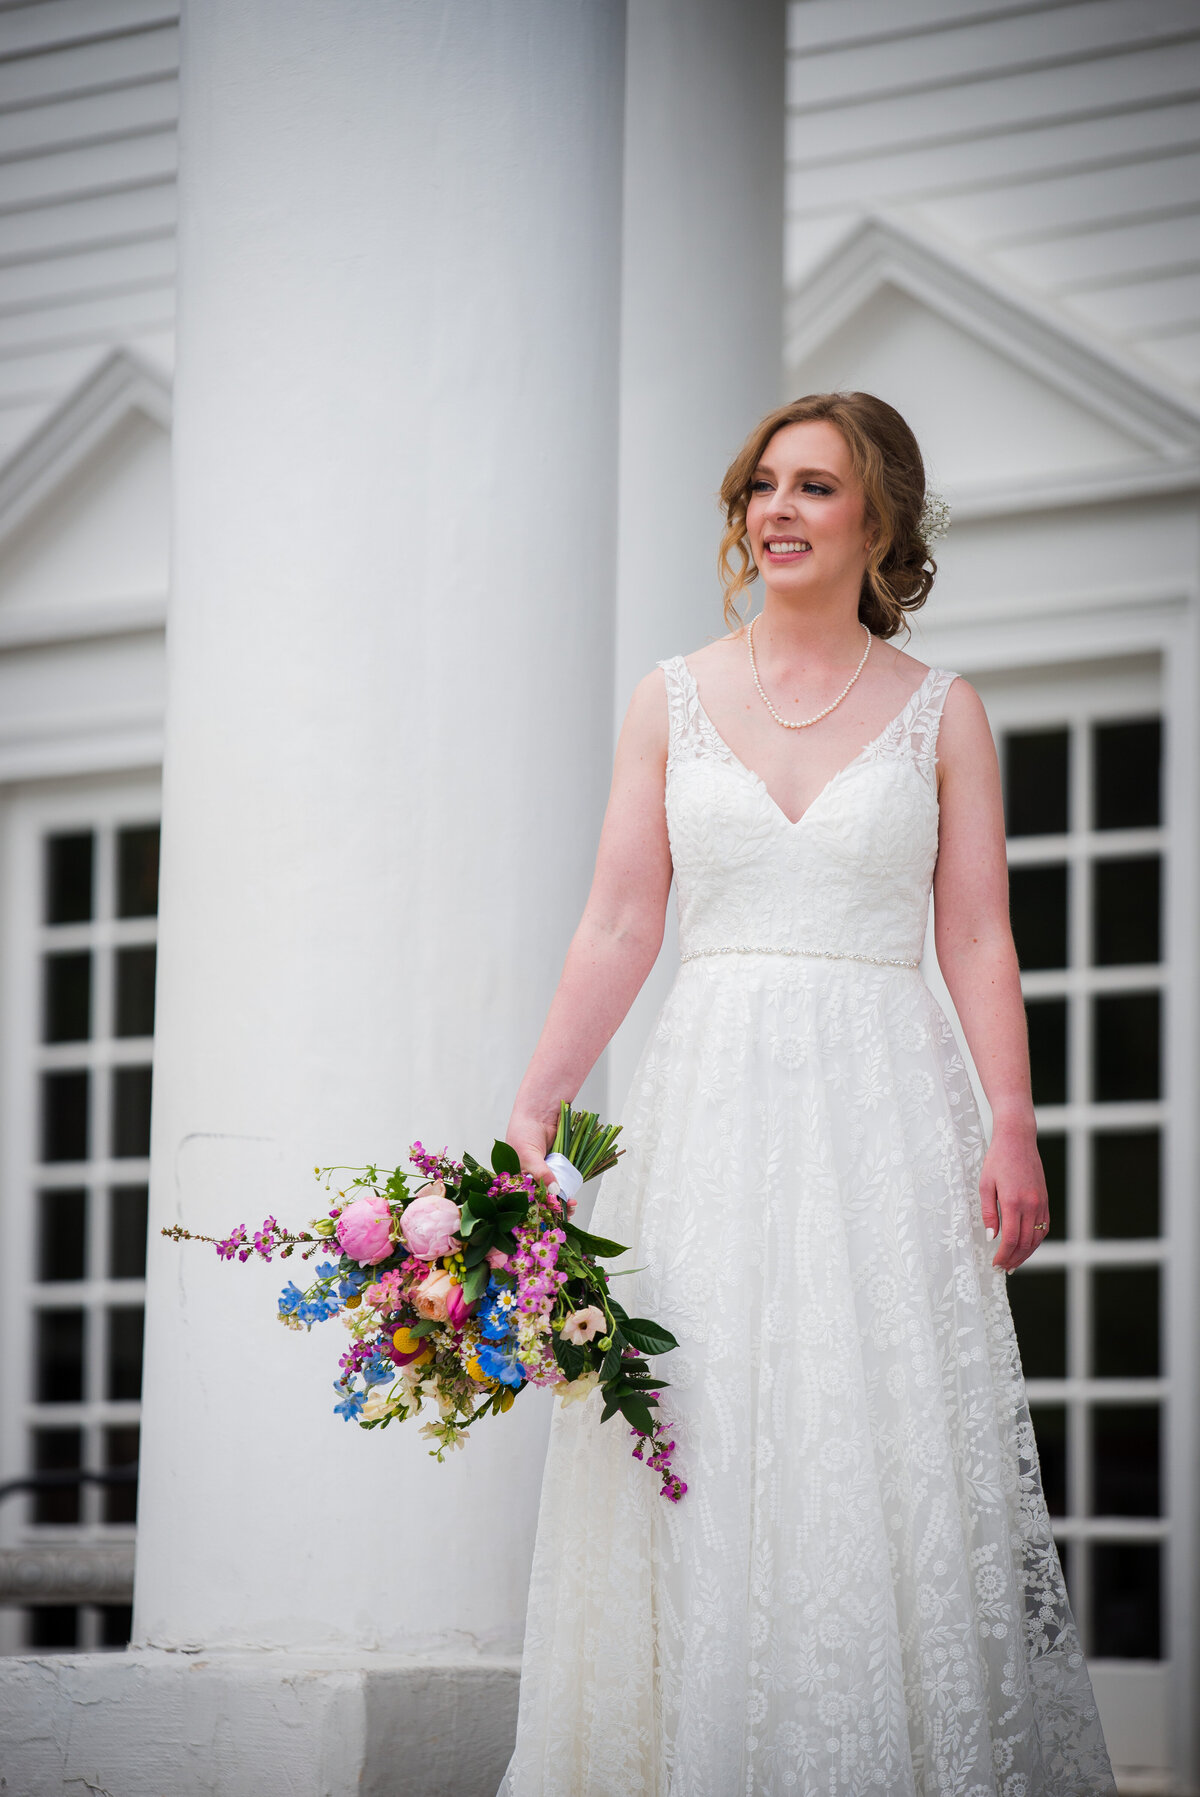 A bride glances off into the distance on the steps of the Manor House in Littleton, Colorado.